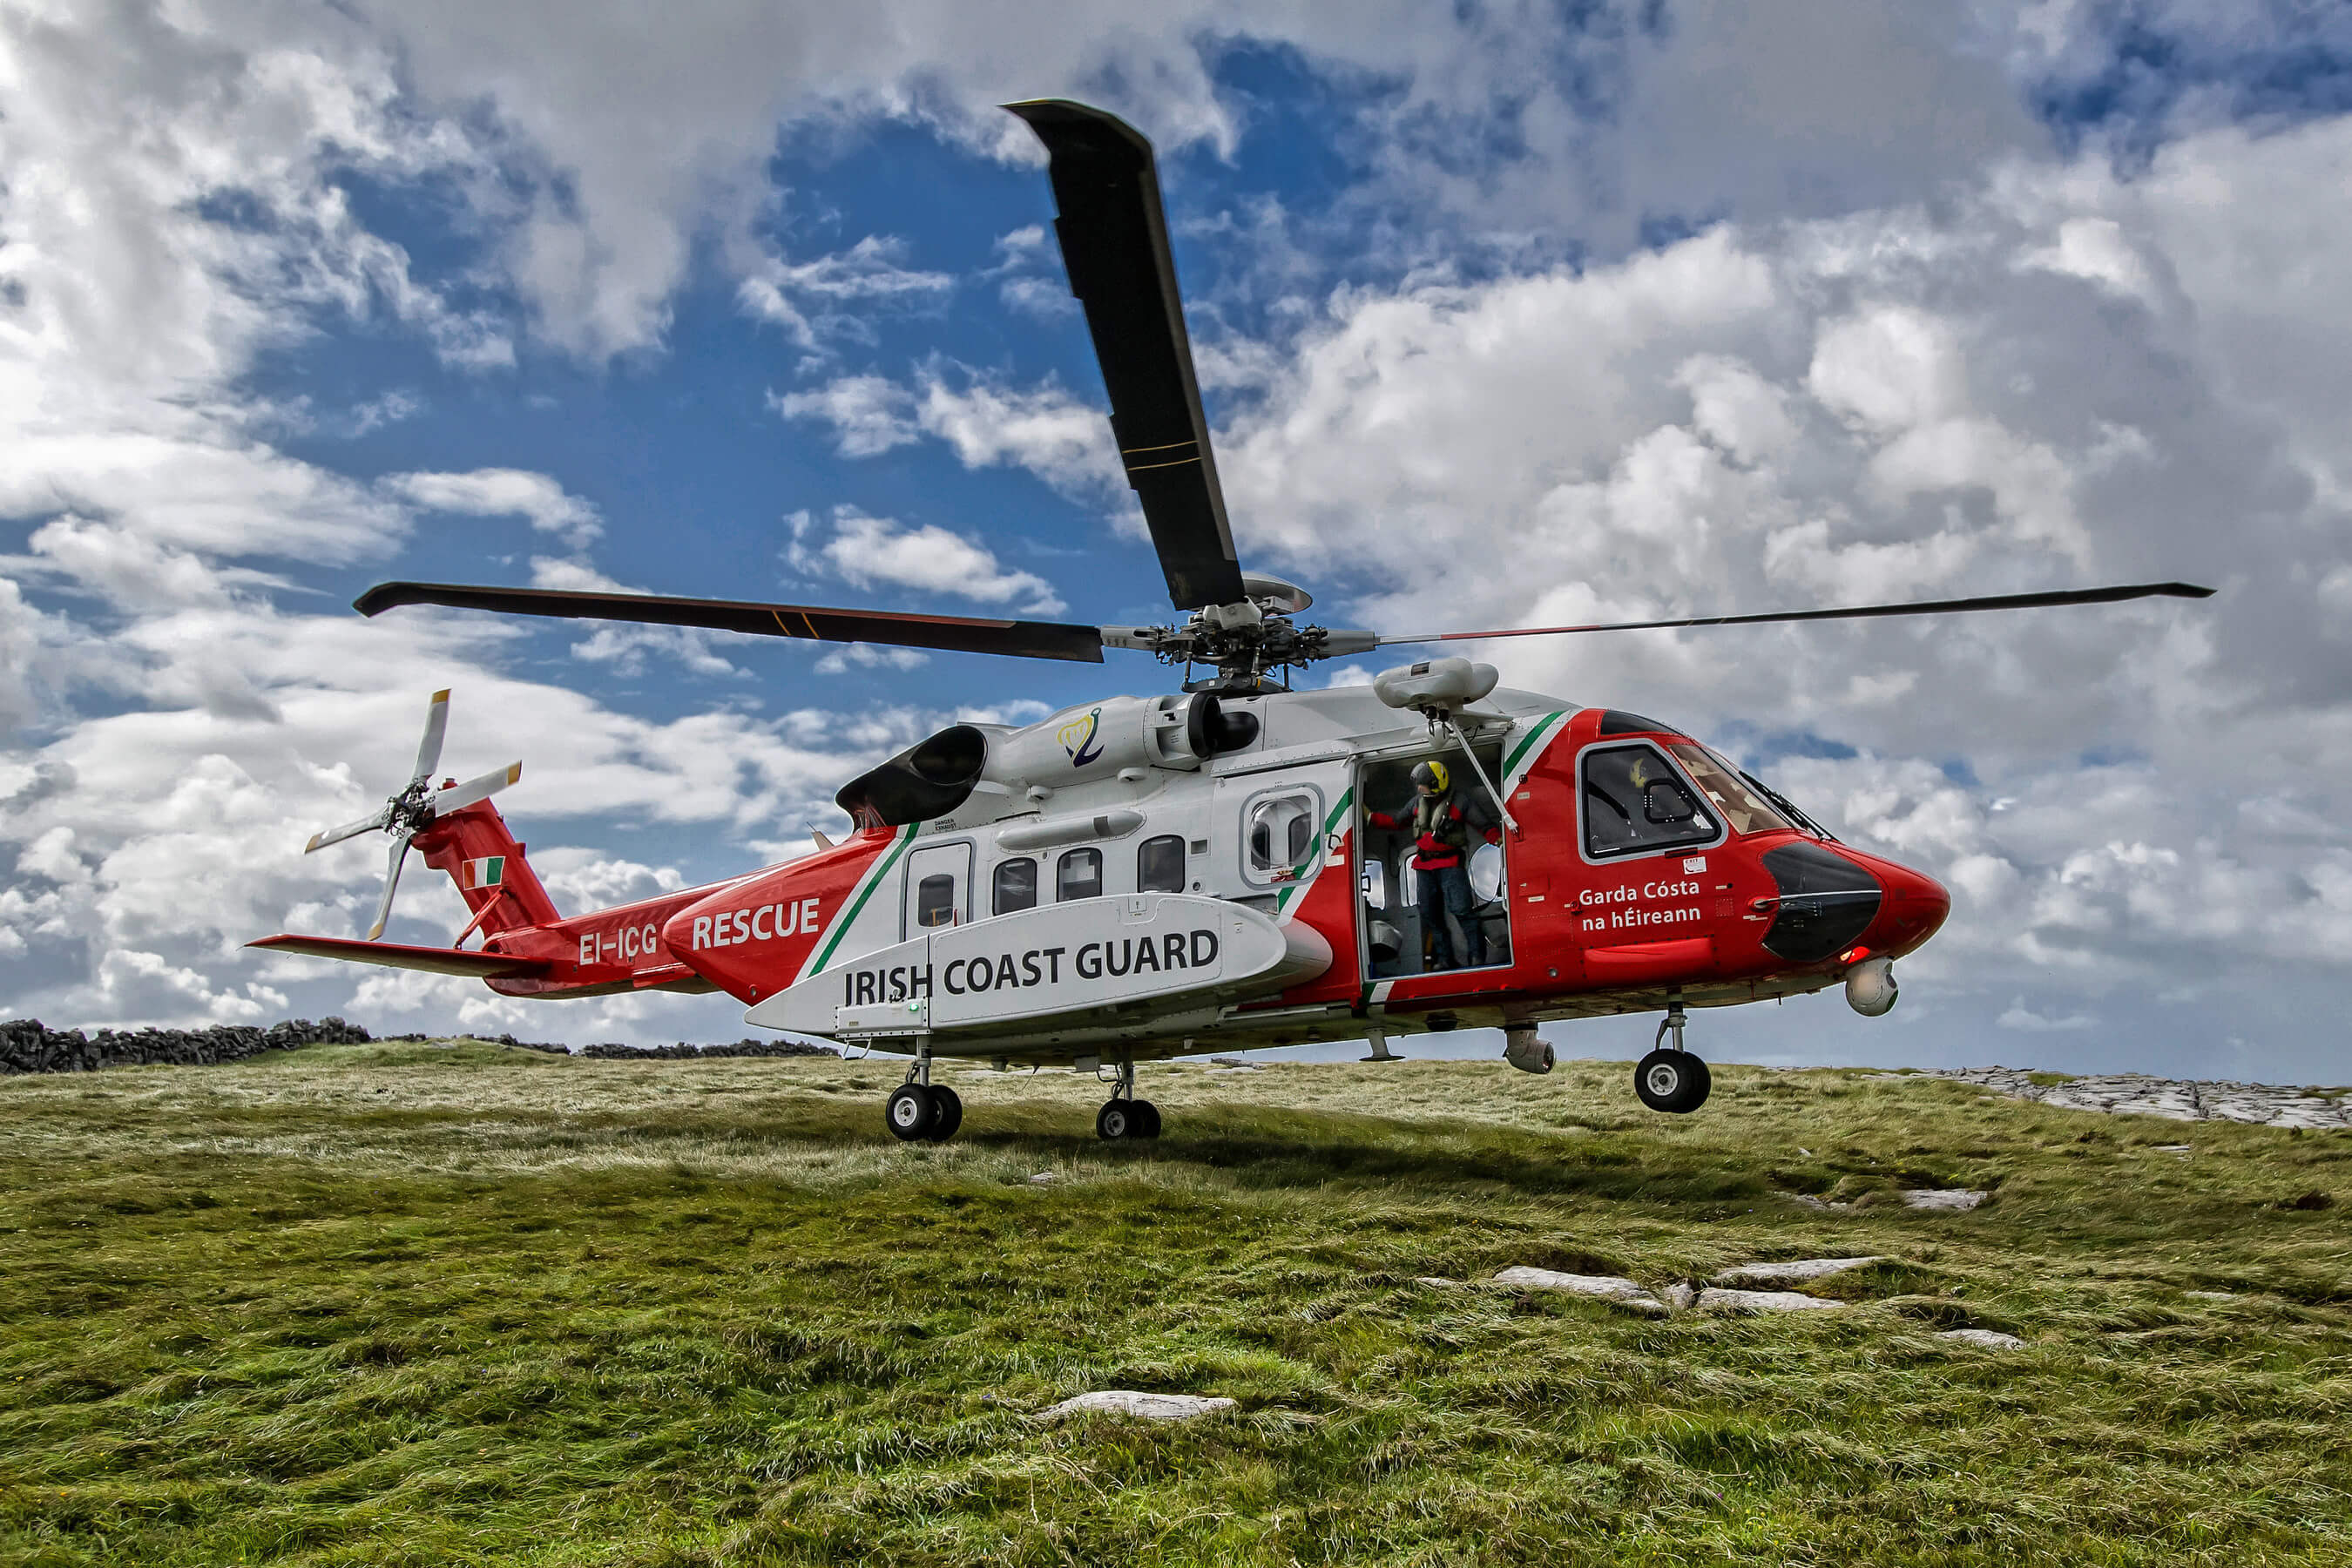 Bristow was selected as the preferred bidder ahead of the existing service provider, CHC Ireland. CHC Helicopter Photo